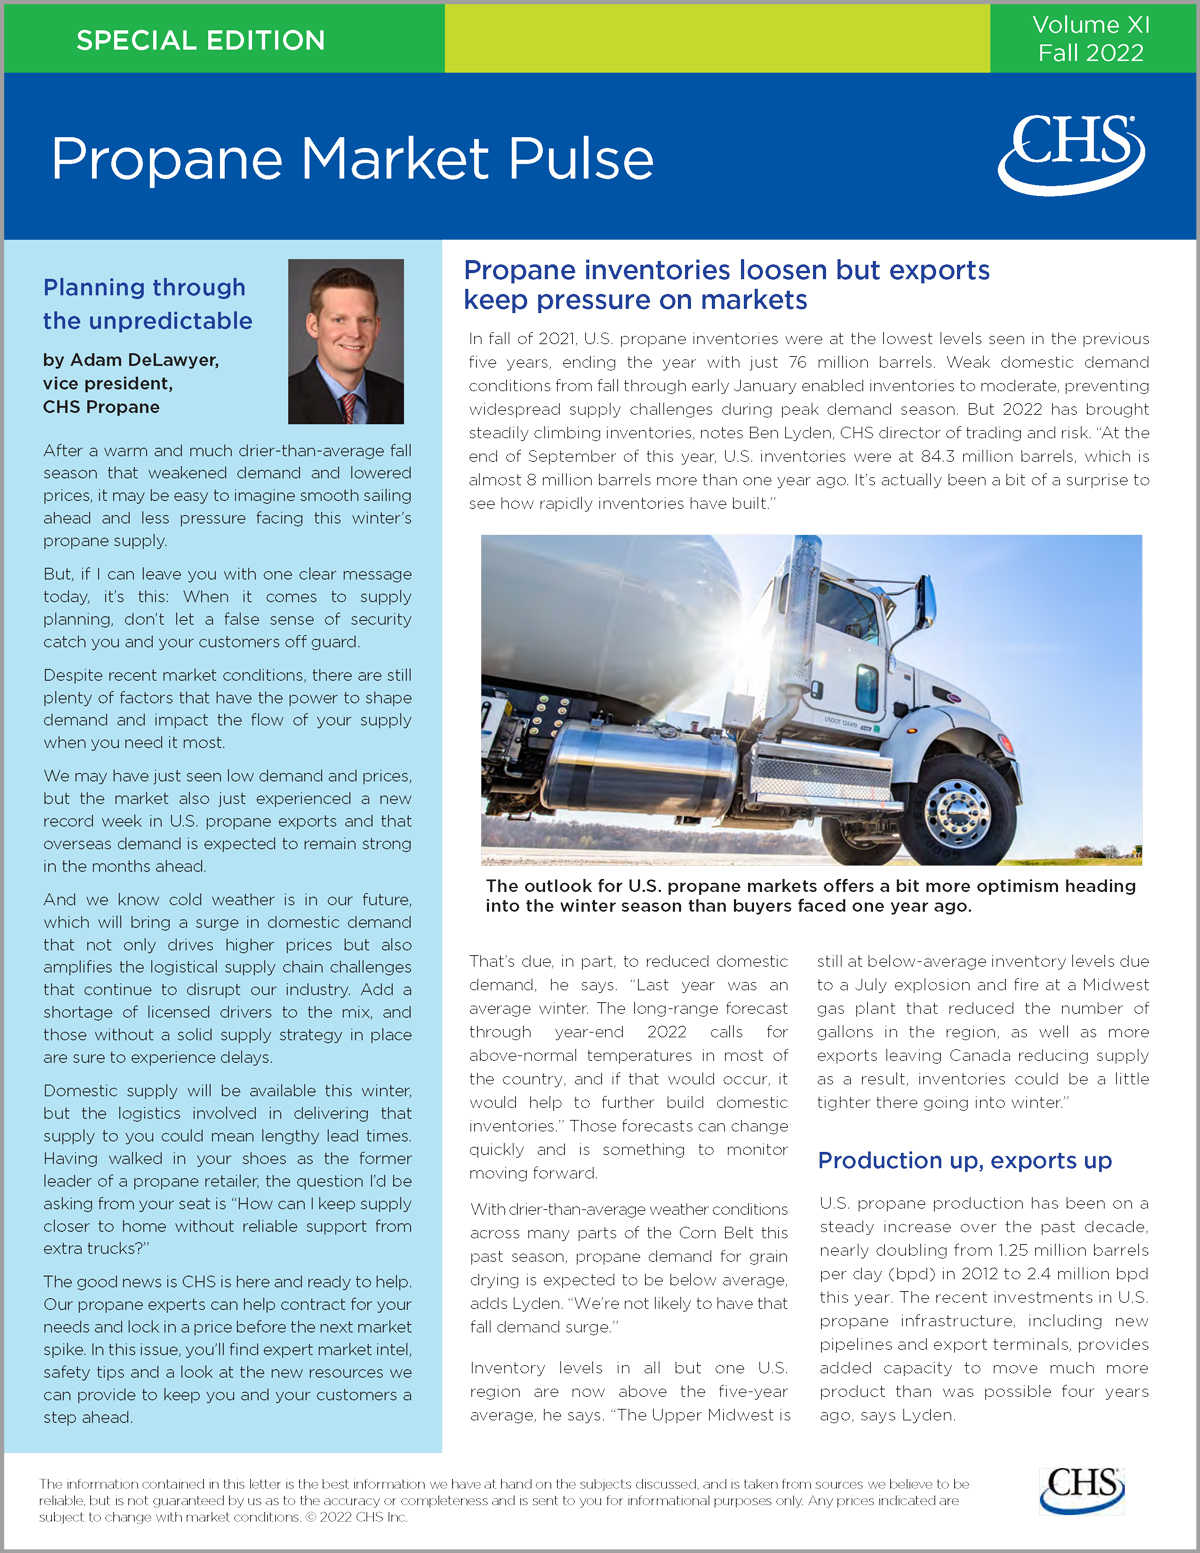 Special Edition of CHS Propane Market Pulse